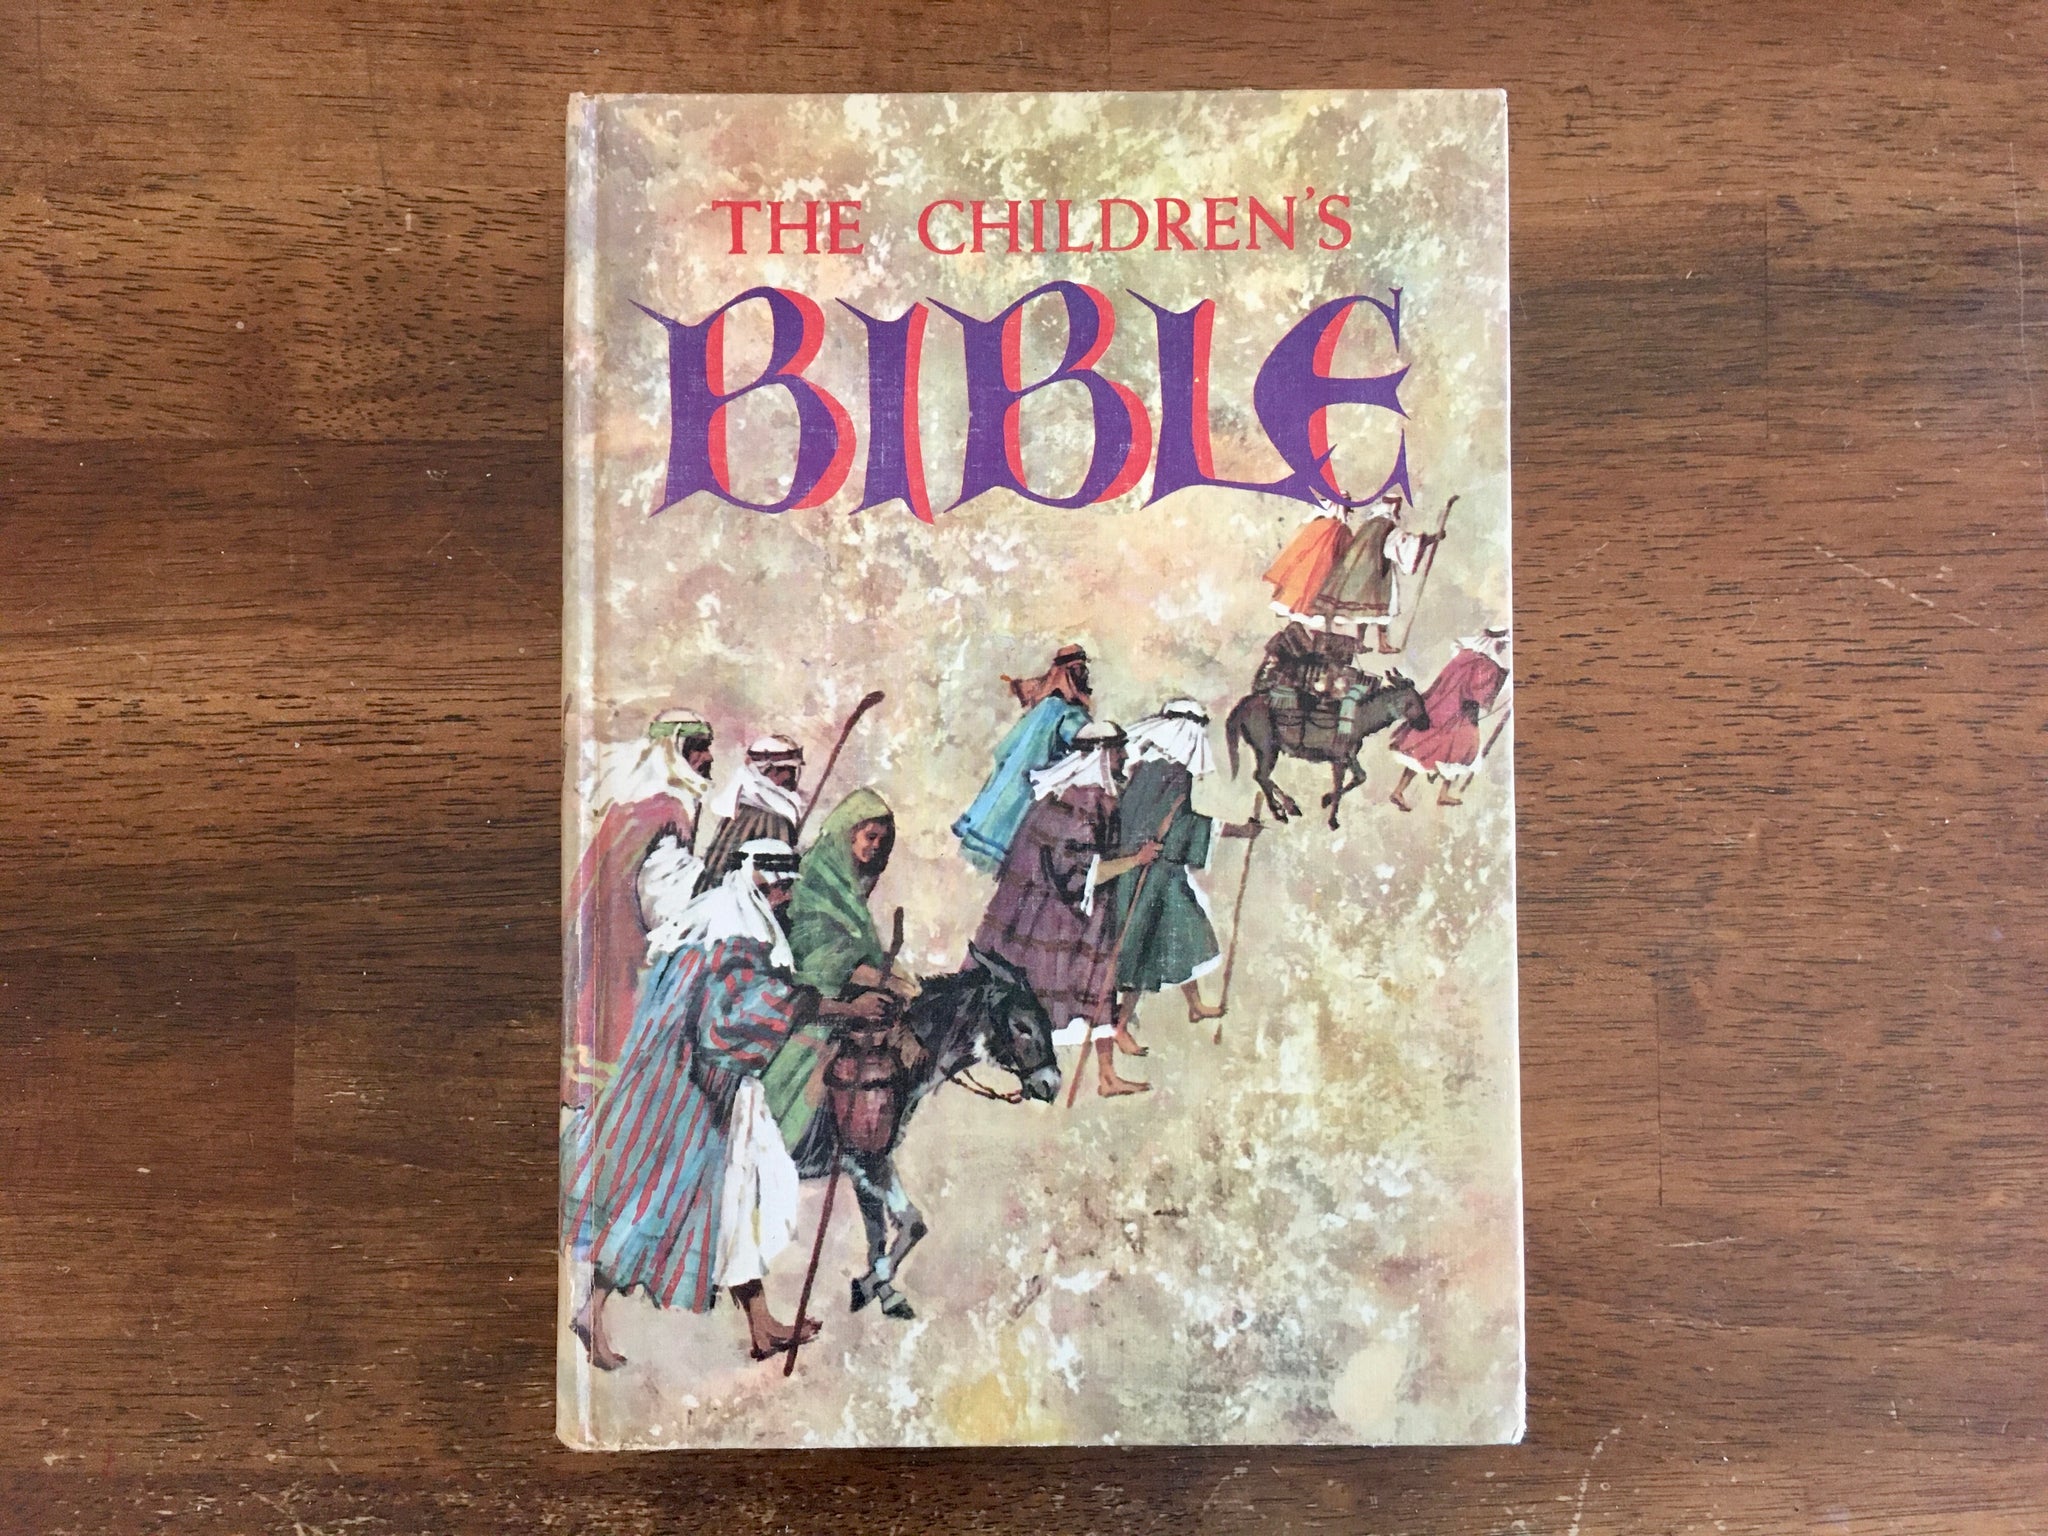 NASB Amazing Illustrated Bible (Softcover) by Editorial Safeliz